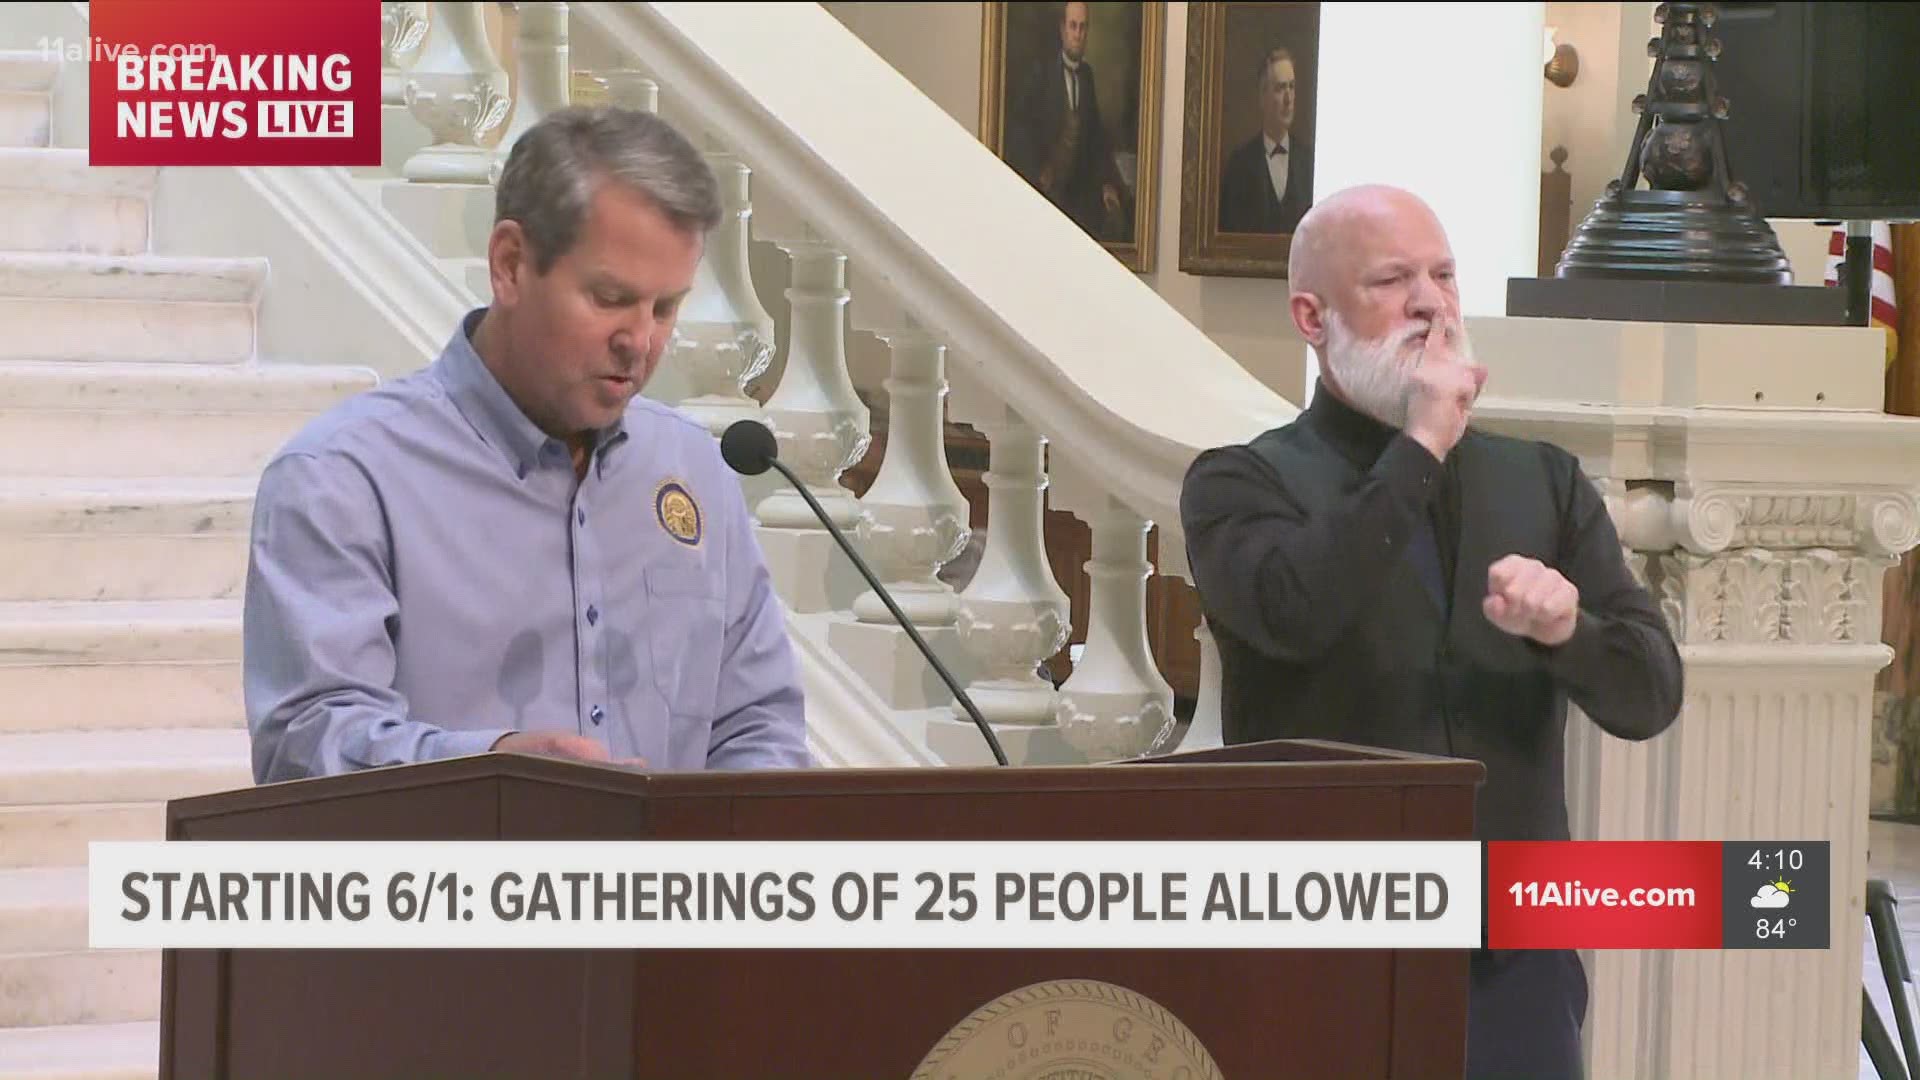 They must meet 39 mandatory measures if they open, Gov. Kemp said.